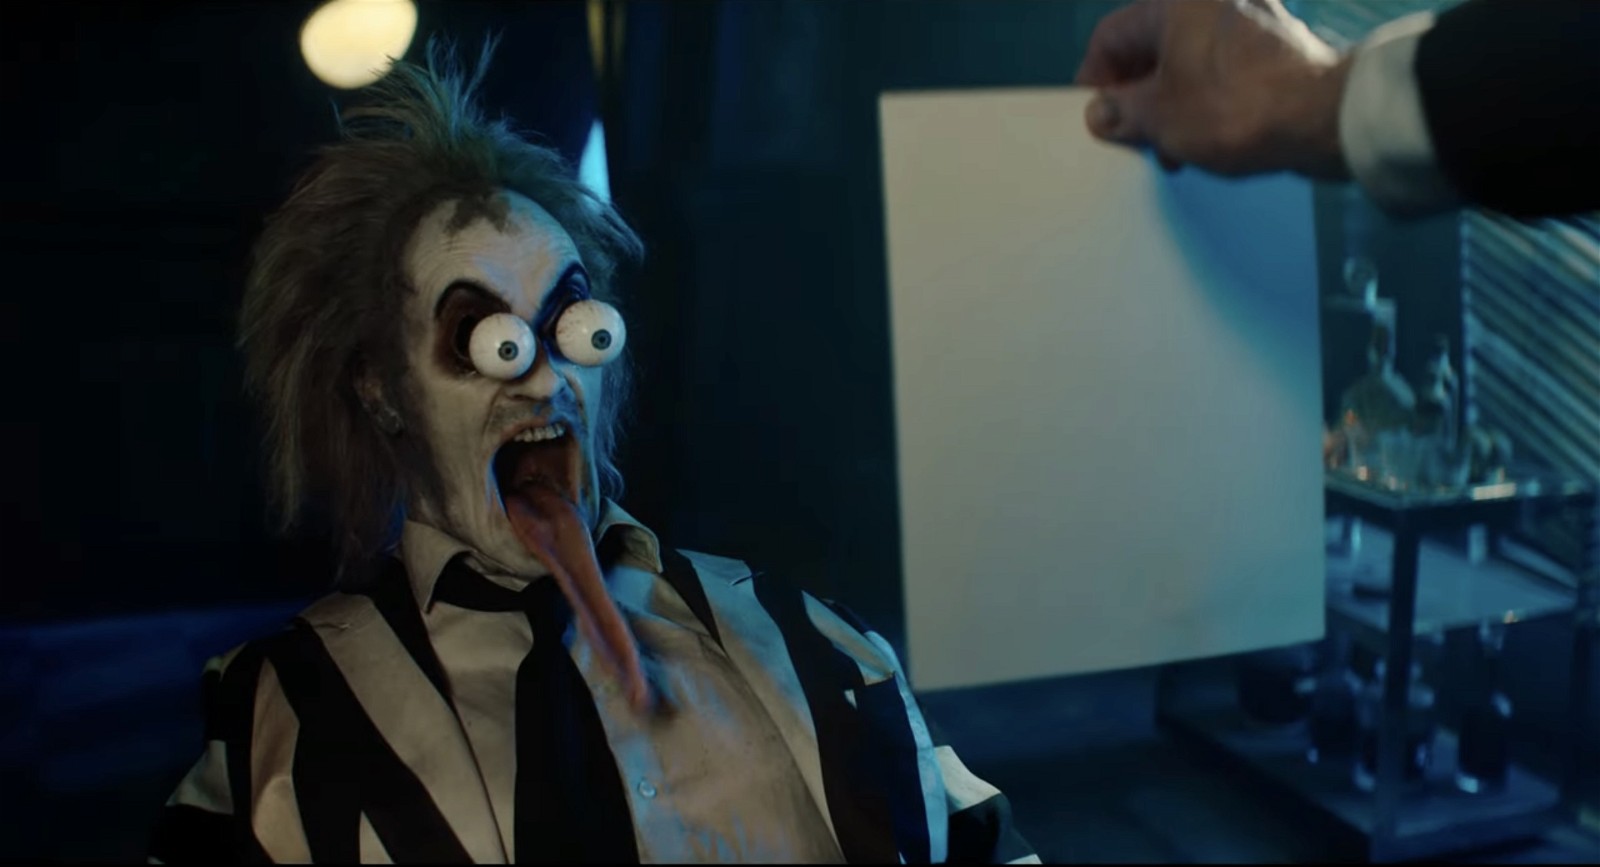 A still from the Beetlejuice 2 trailer [Credits: Warner Bros.]